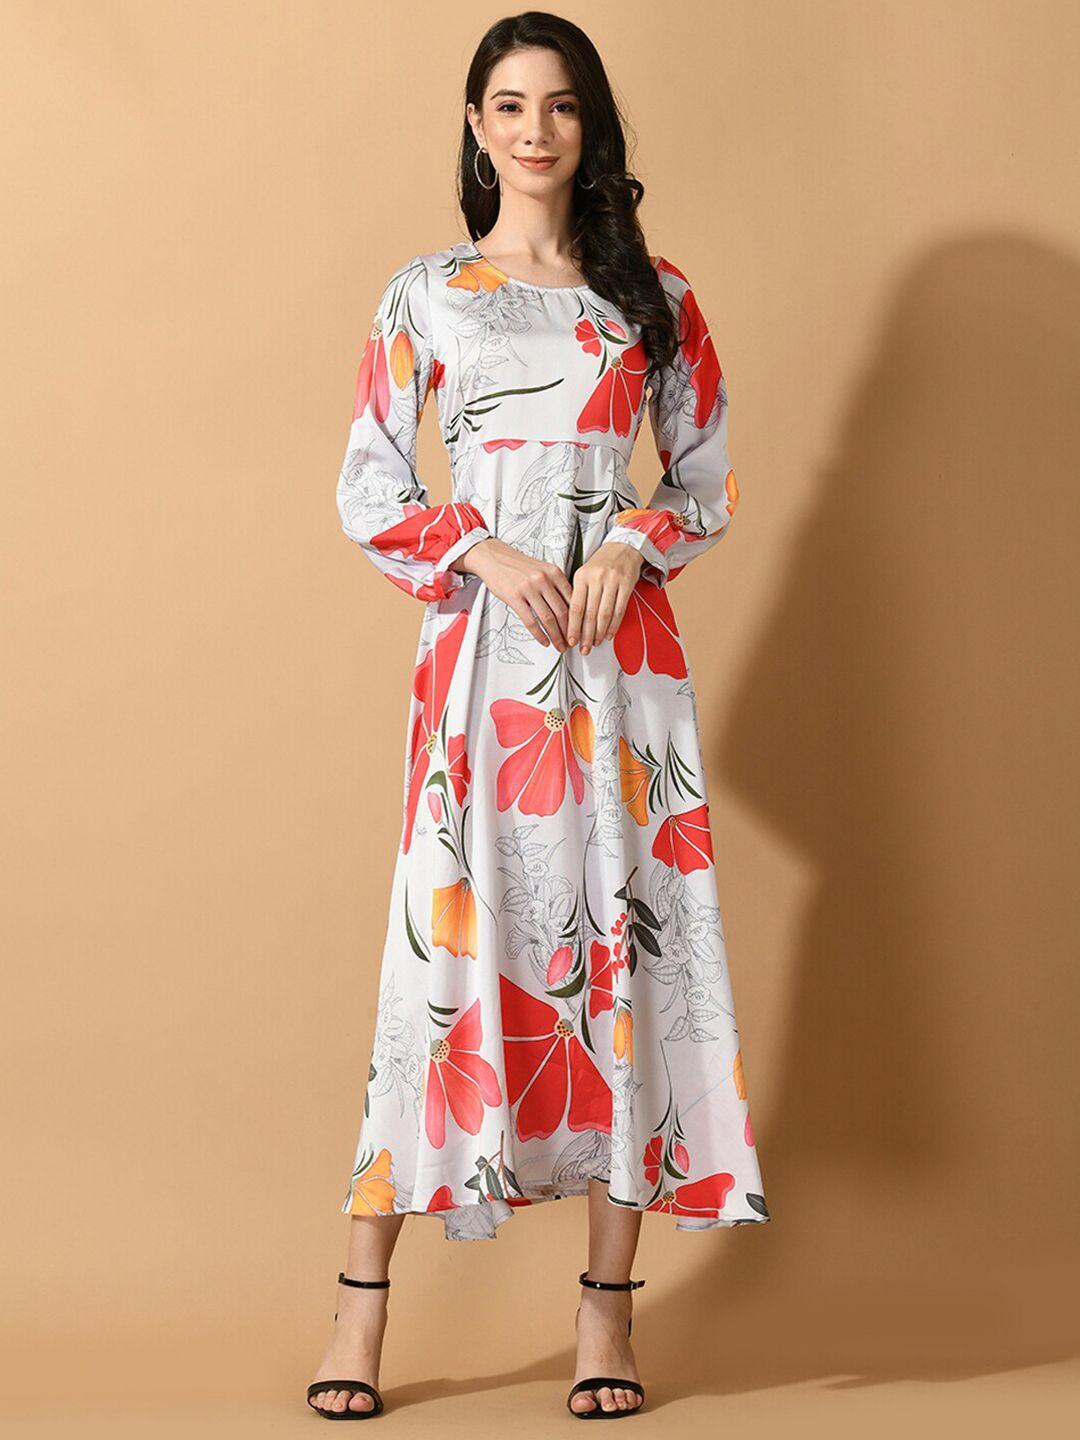 sangria white floral printed cuffed sleeves fit & flared midi satin dress